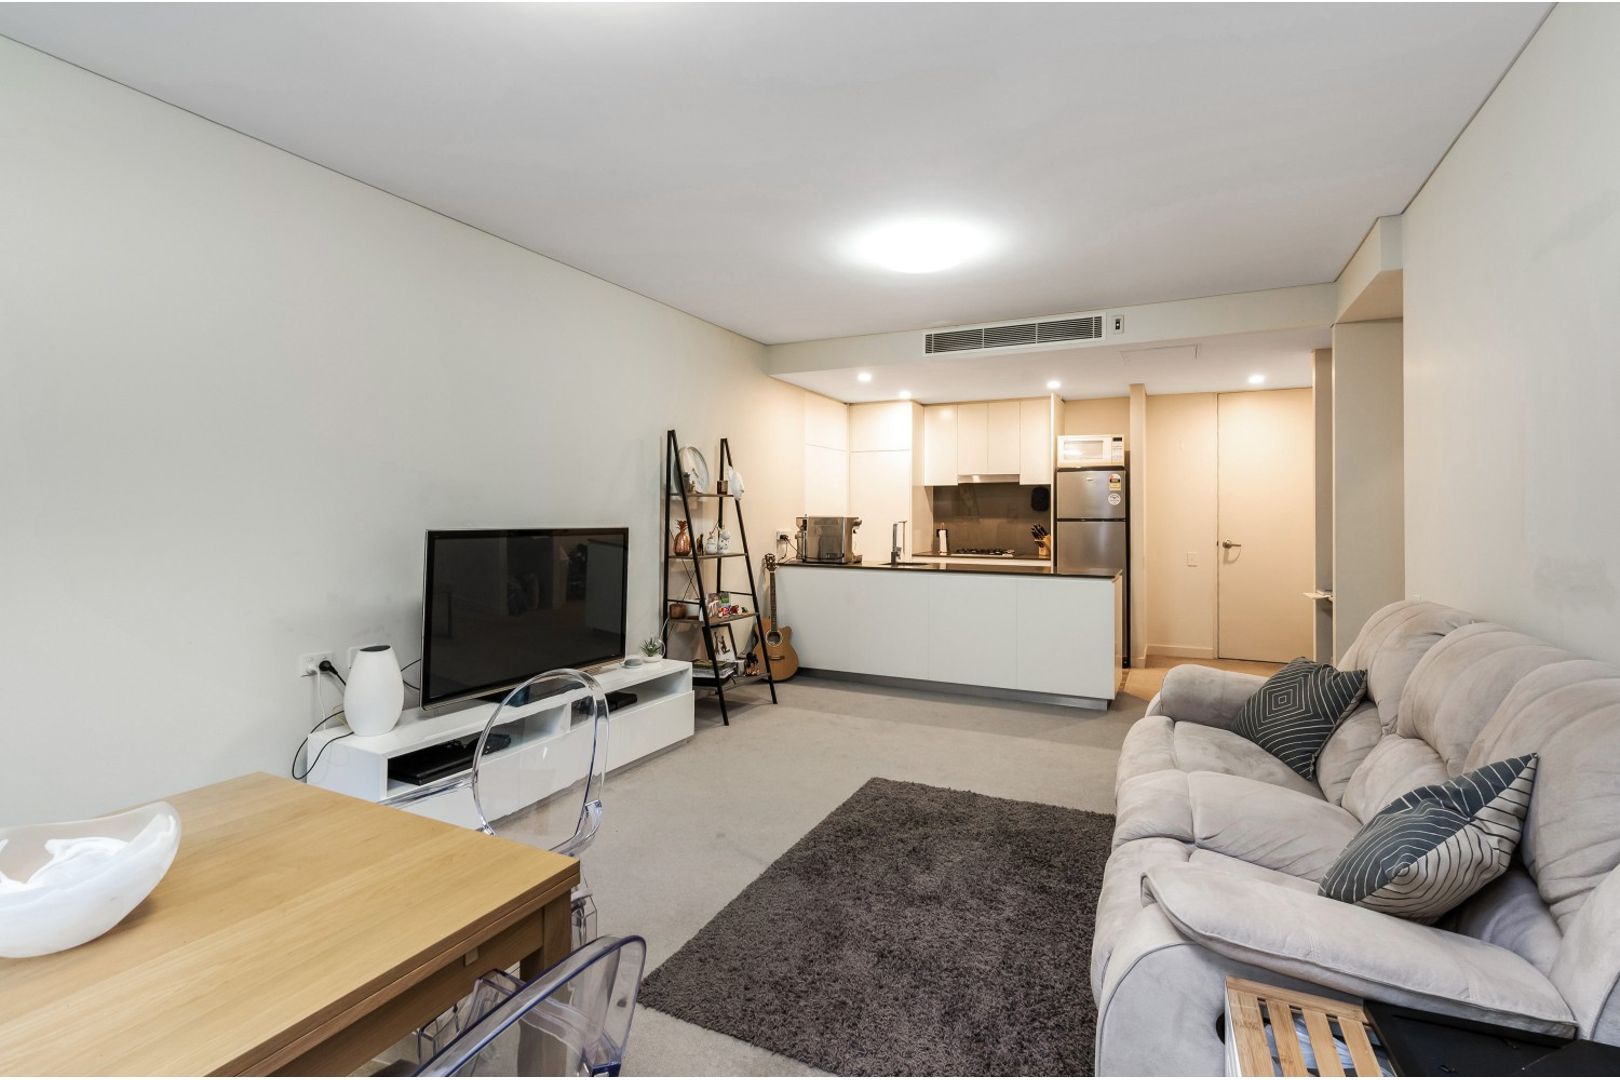 11/554-560 Mowbray Road West, Lane Cove North NSW 2066, Image 1